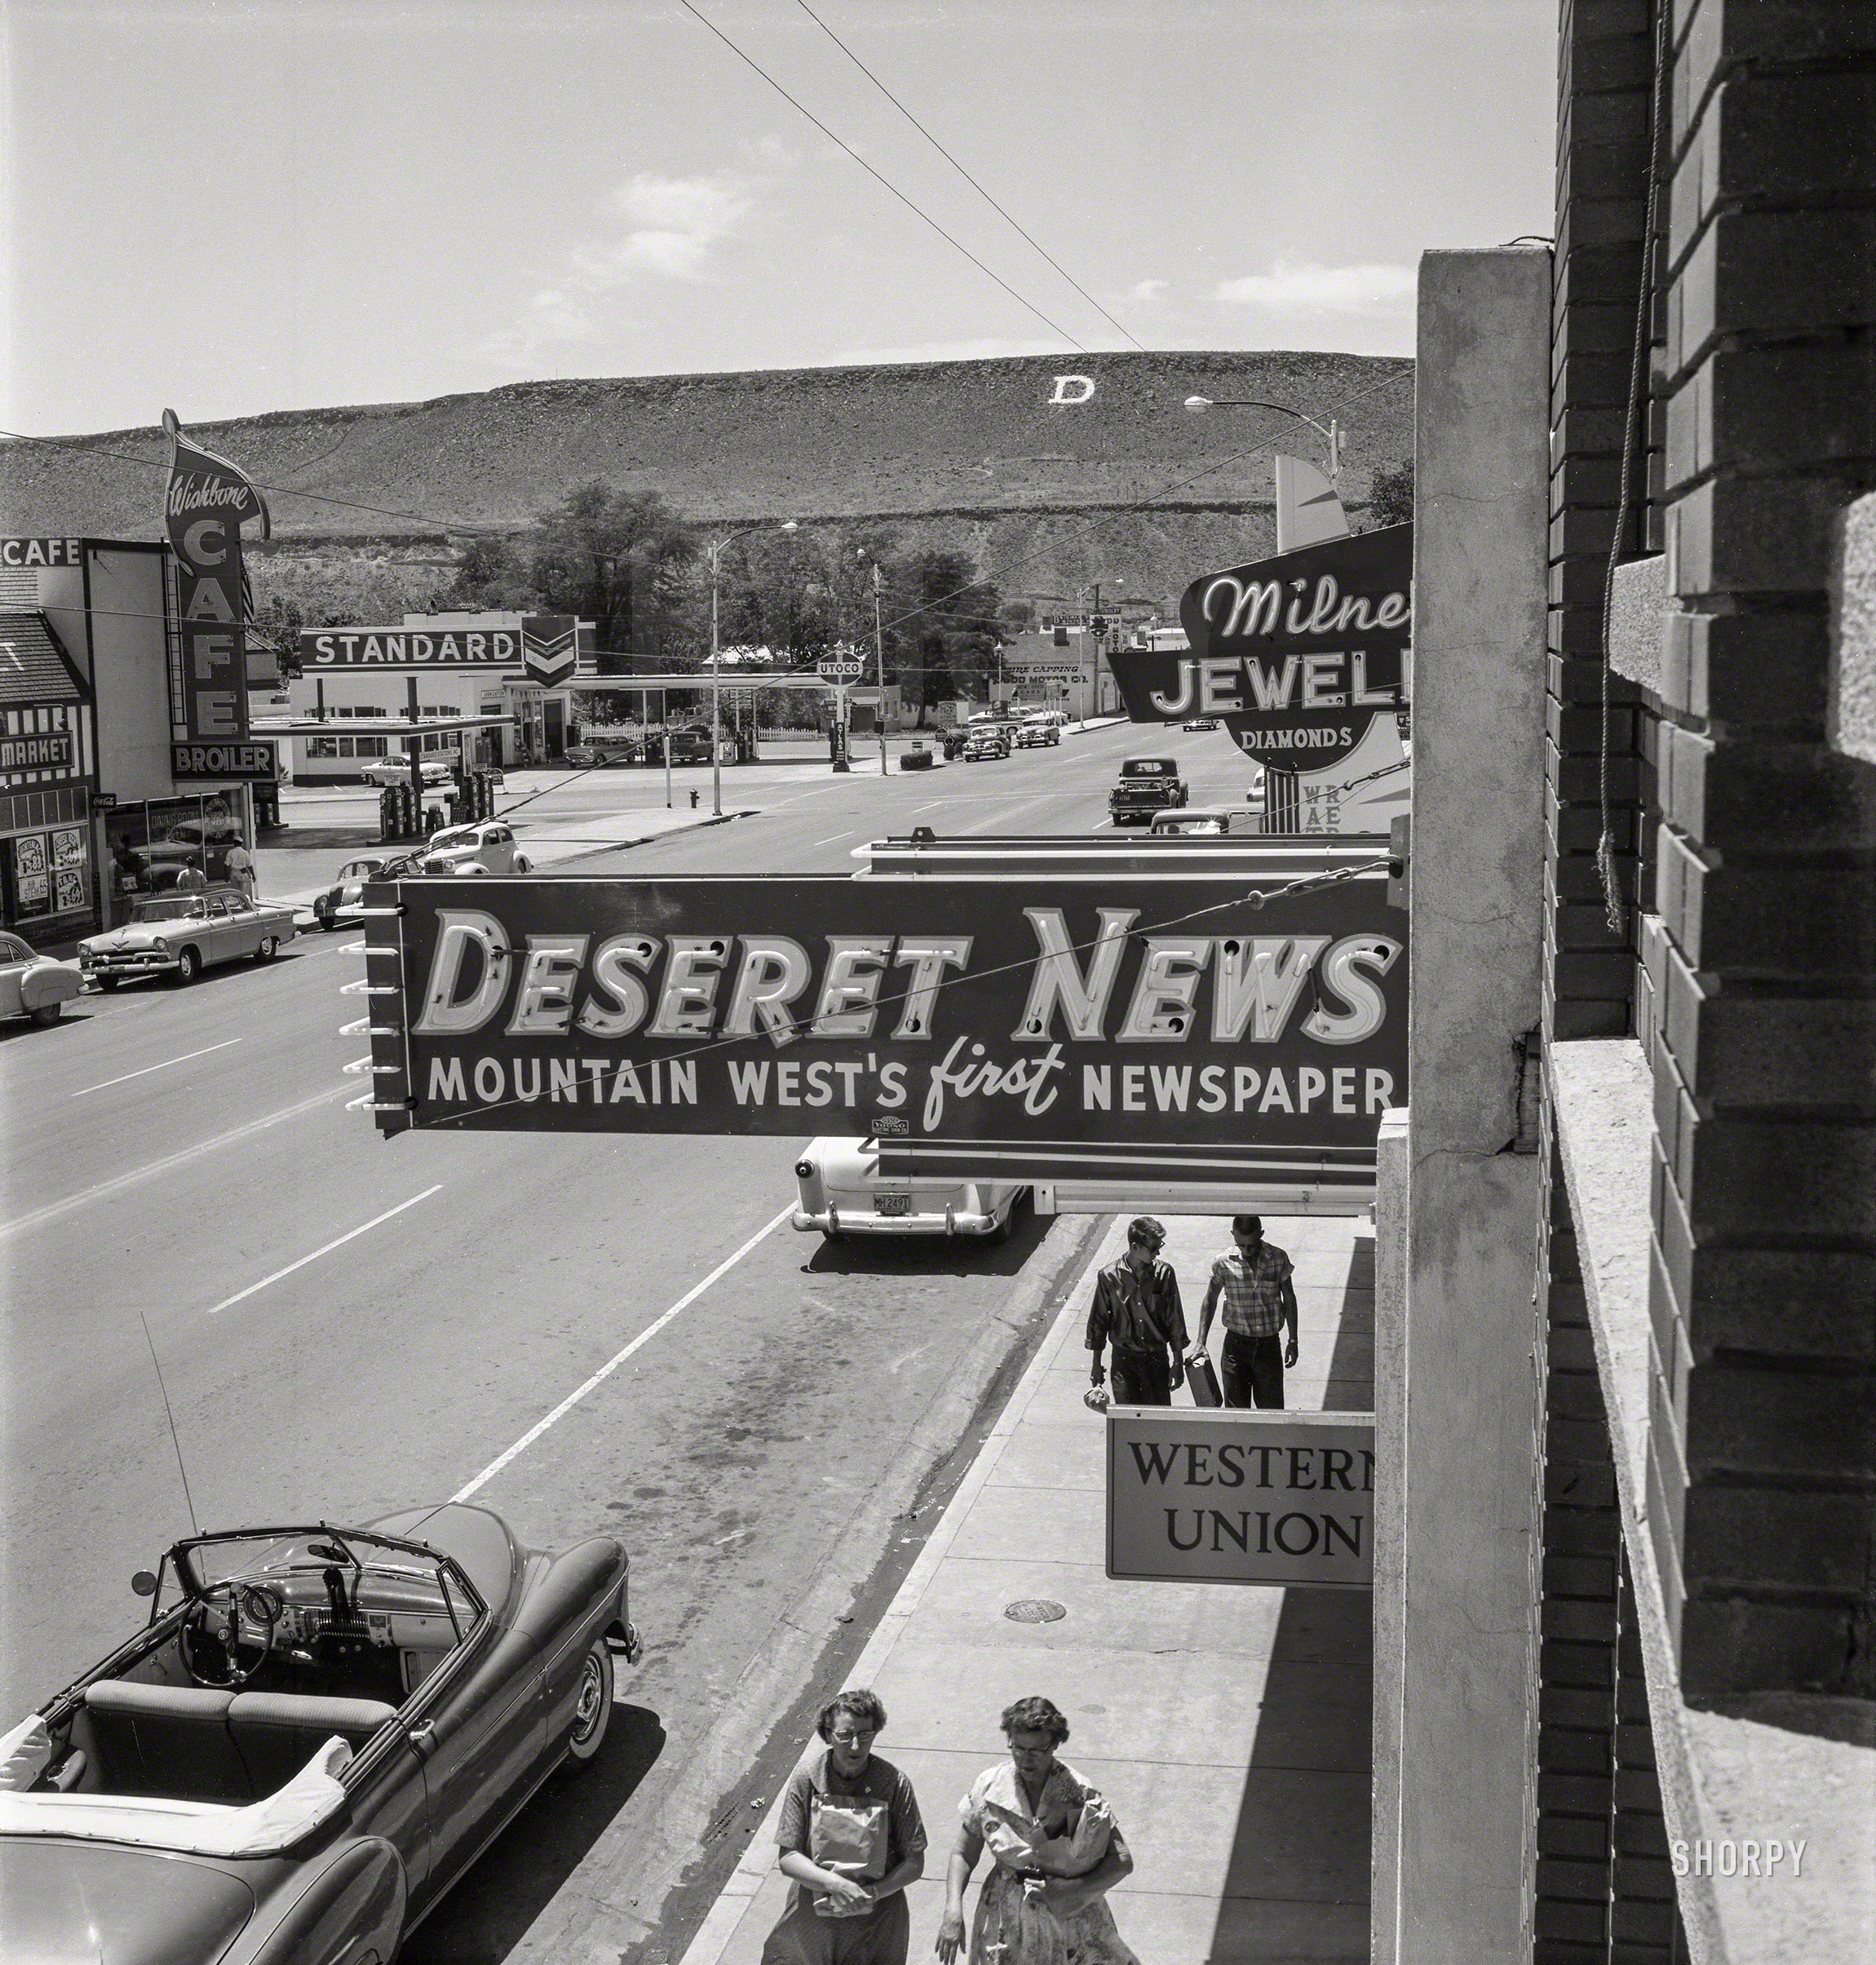 June 7, 1957. "Exterior scenes in St. George, Utah. Local residents being interviewed about their feelings on nuclear testing. Photos by Charles Steinheimer from Black Star. Roll 5: Main Street scenes." From the U.S. News & World Report archive donated to the Library of Congress. View full size.